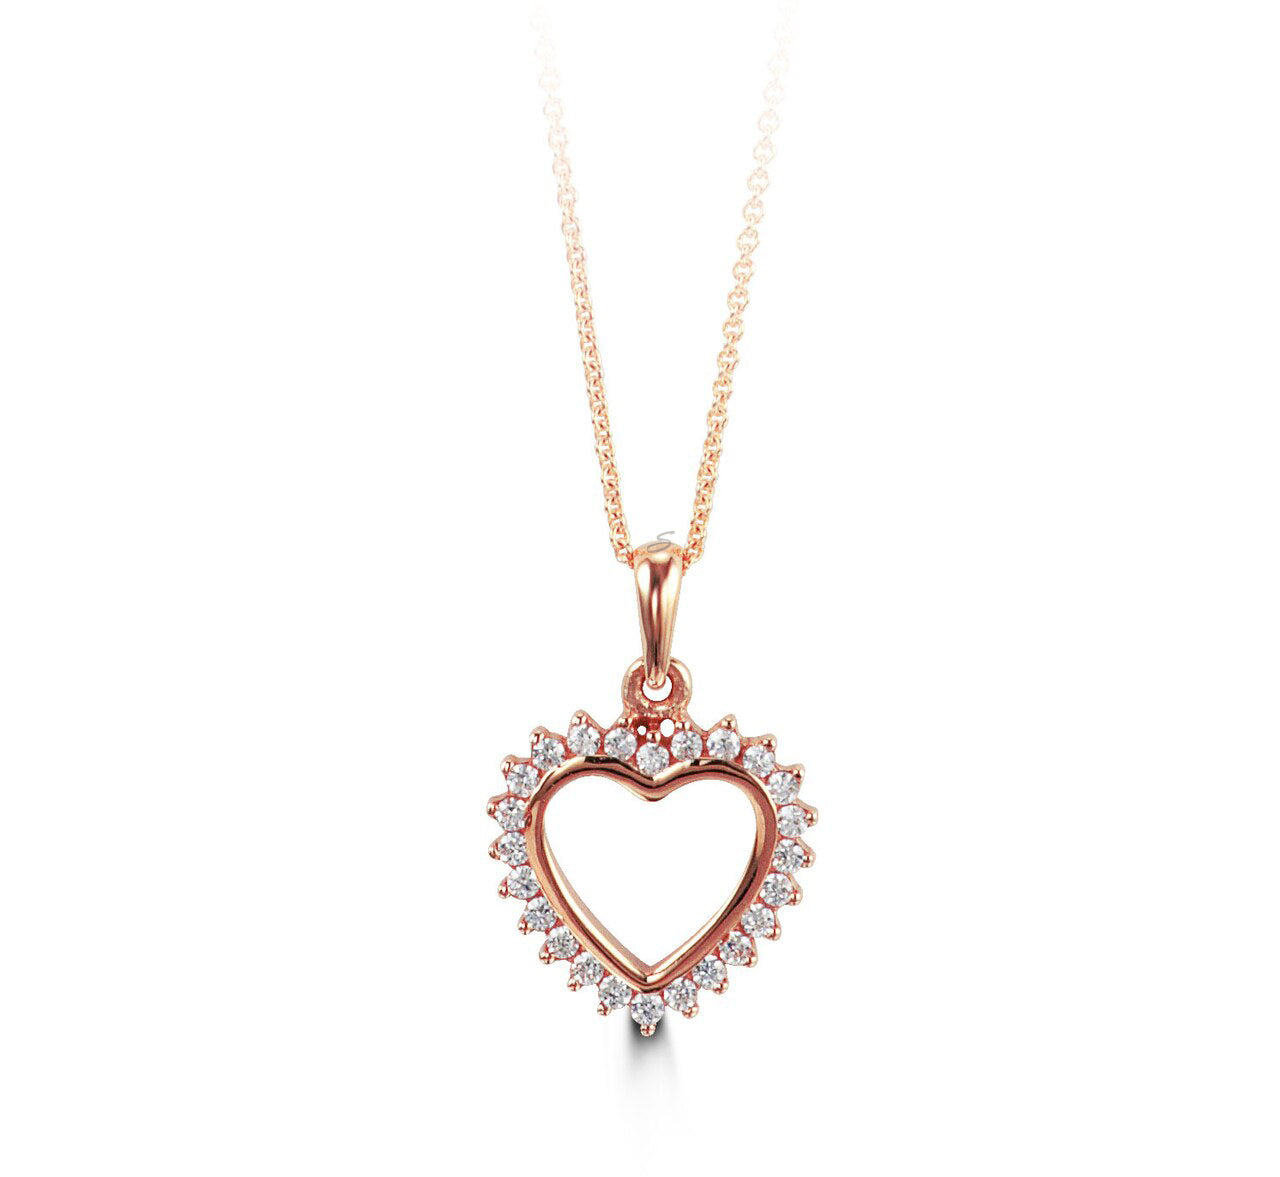 10K Rose Gold CZ Hear Pendant with Chain